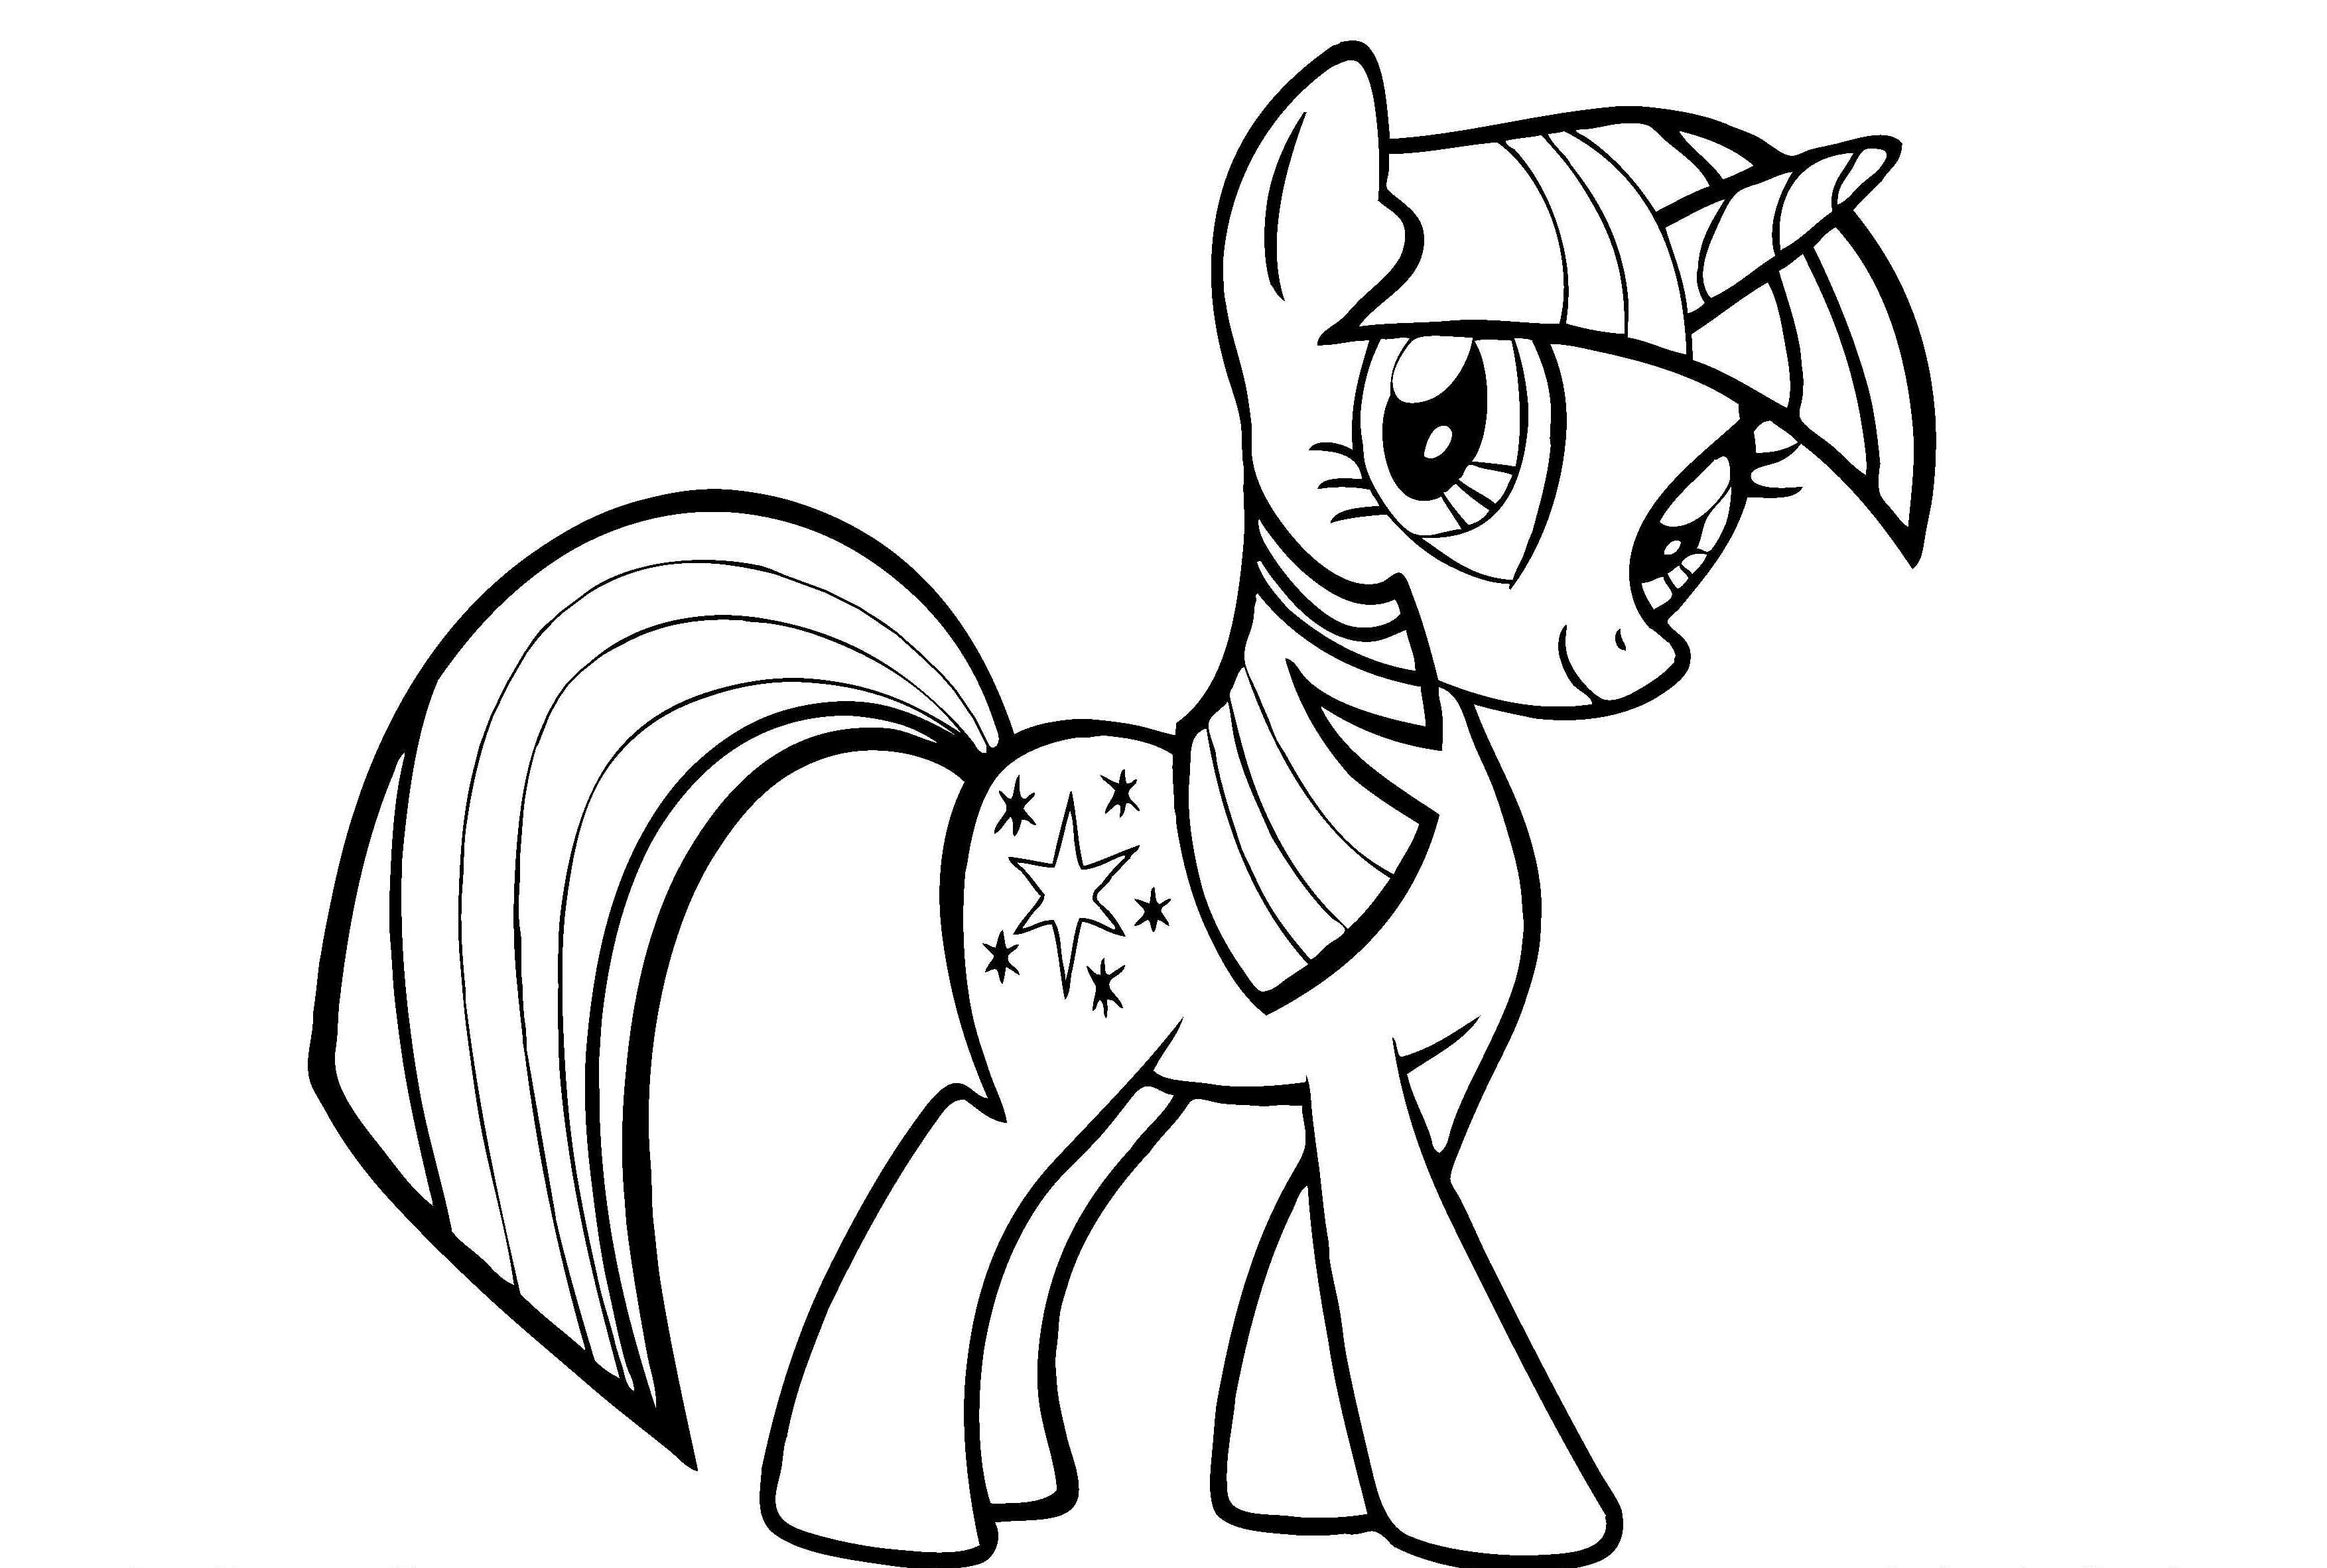 Twilight Sparkle My Little Pony Coloring Pages Coloring Pages For ...